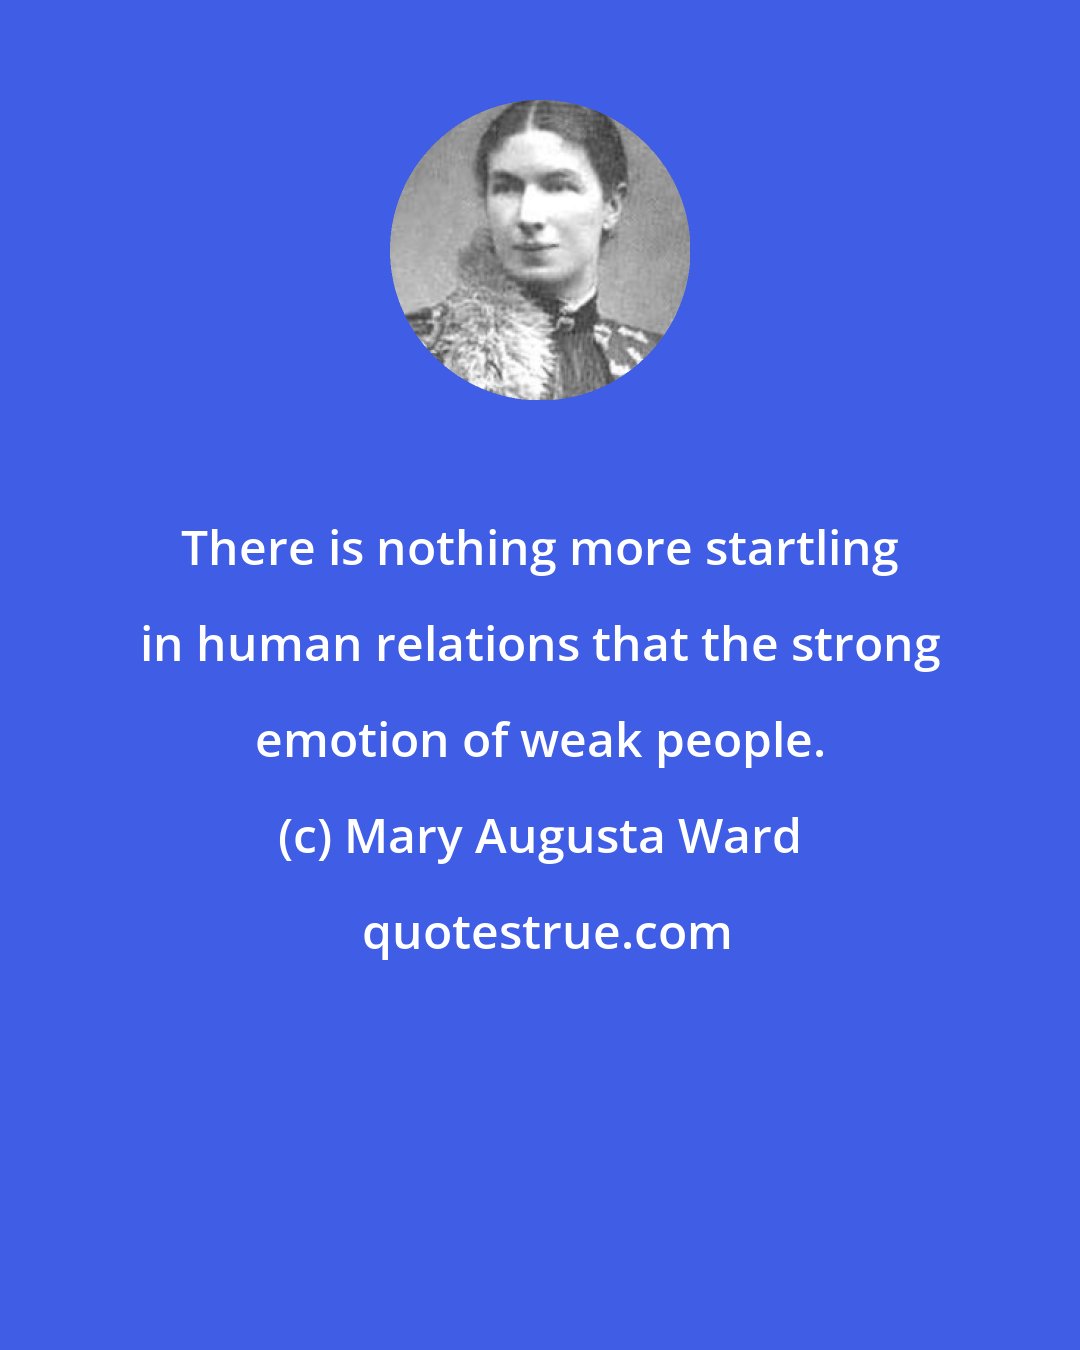 Mary Augusta Ward: There is nothing more startling in human relations that the strong emotion of weak people.